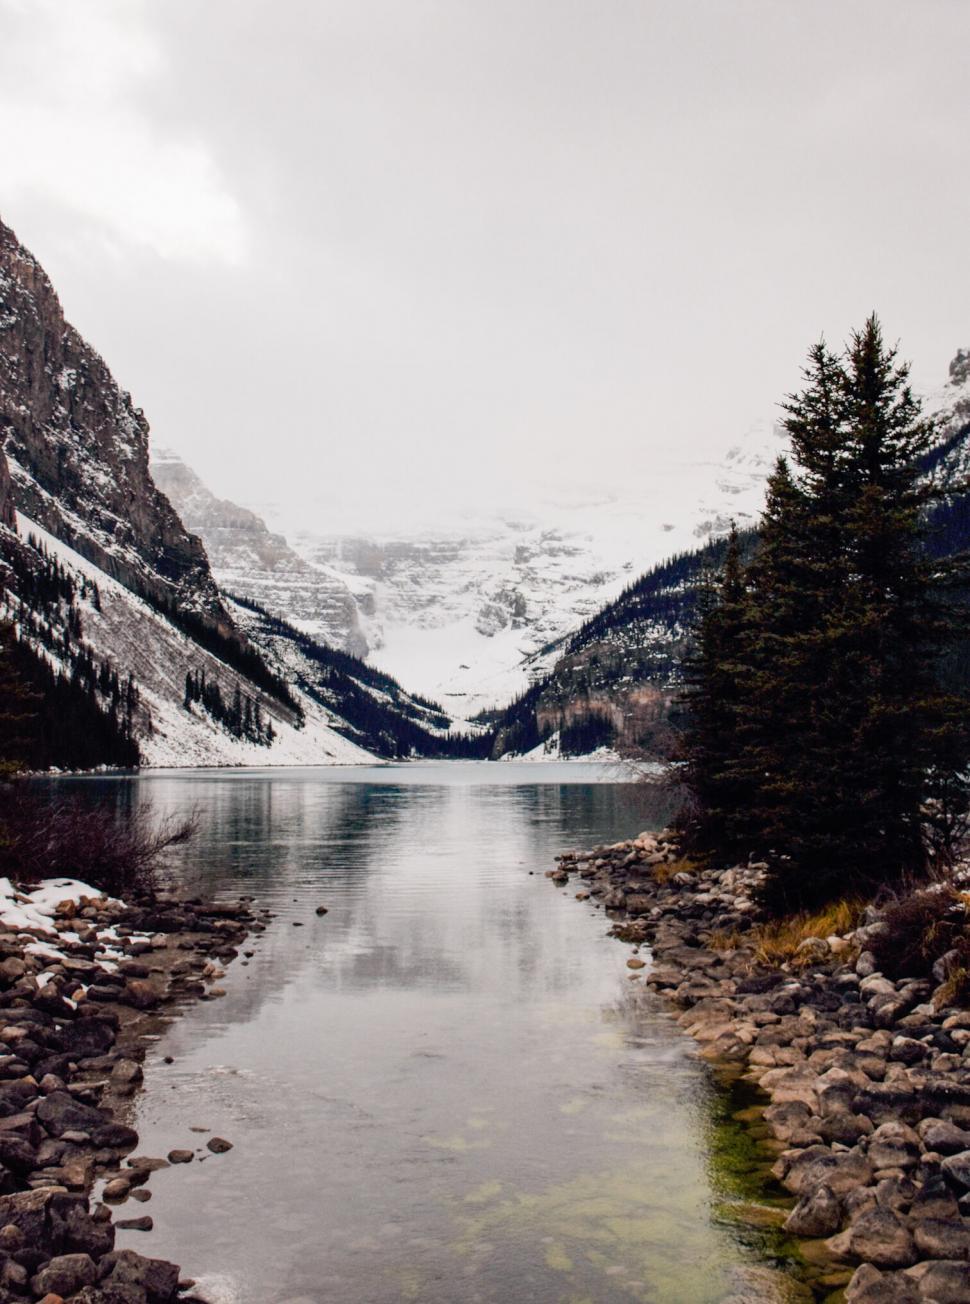 Free Image of Serene Mountain Lake with Snowy Peaks 